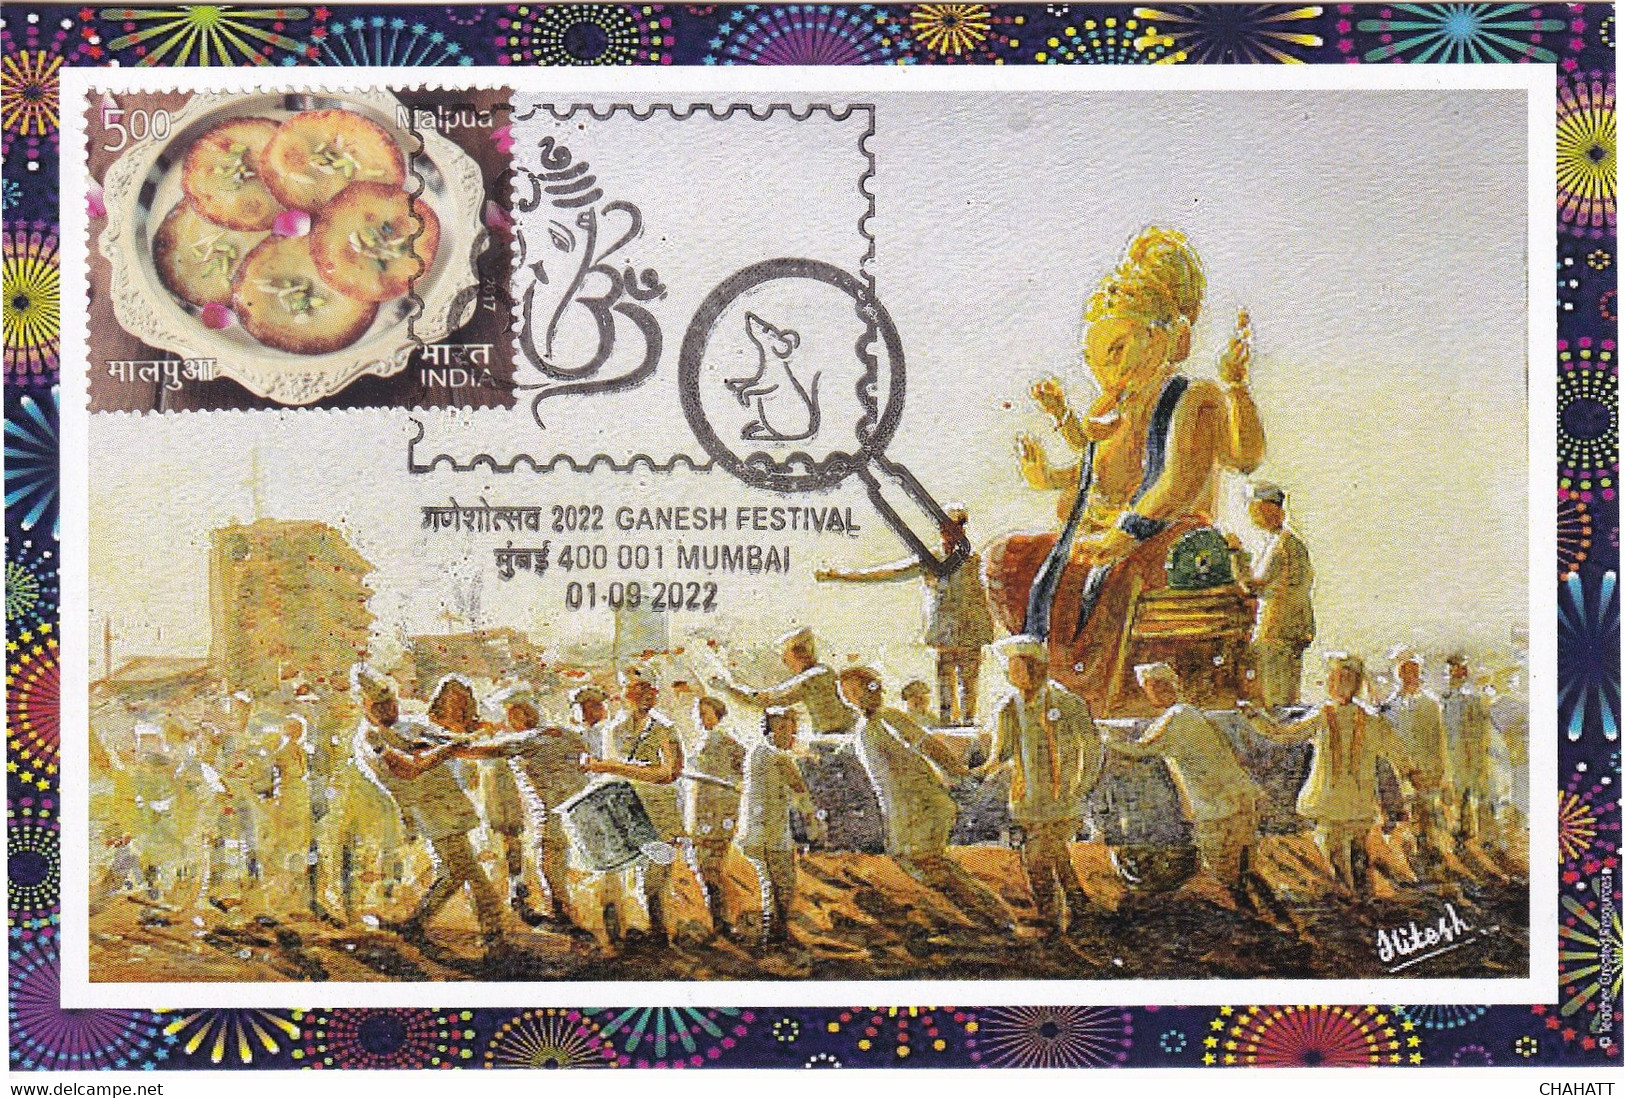 HINDUISM - LORD GANESHA - FESTIVAL -PPC WITH PICTORIAL CANCEL -#1 OF 15 -INDIA-2022- NMC2-35 - Hinduism